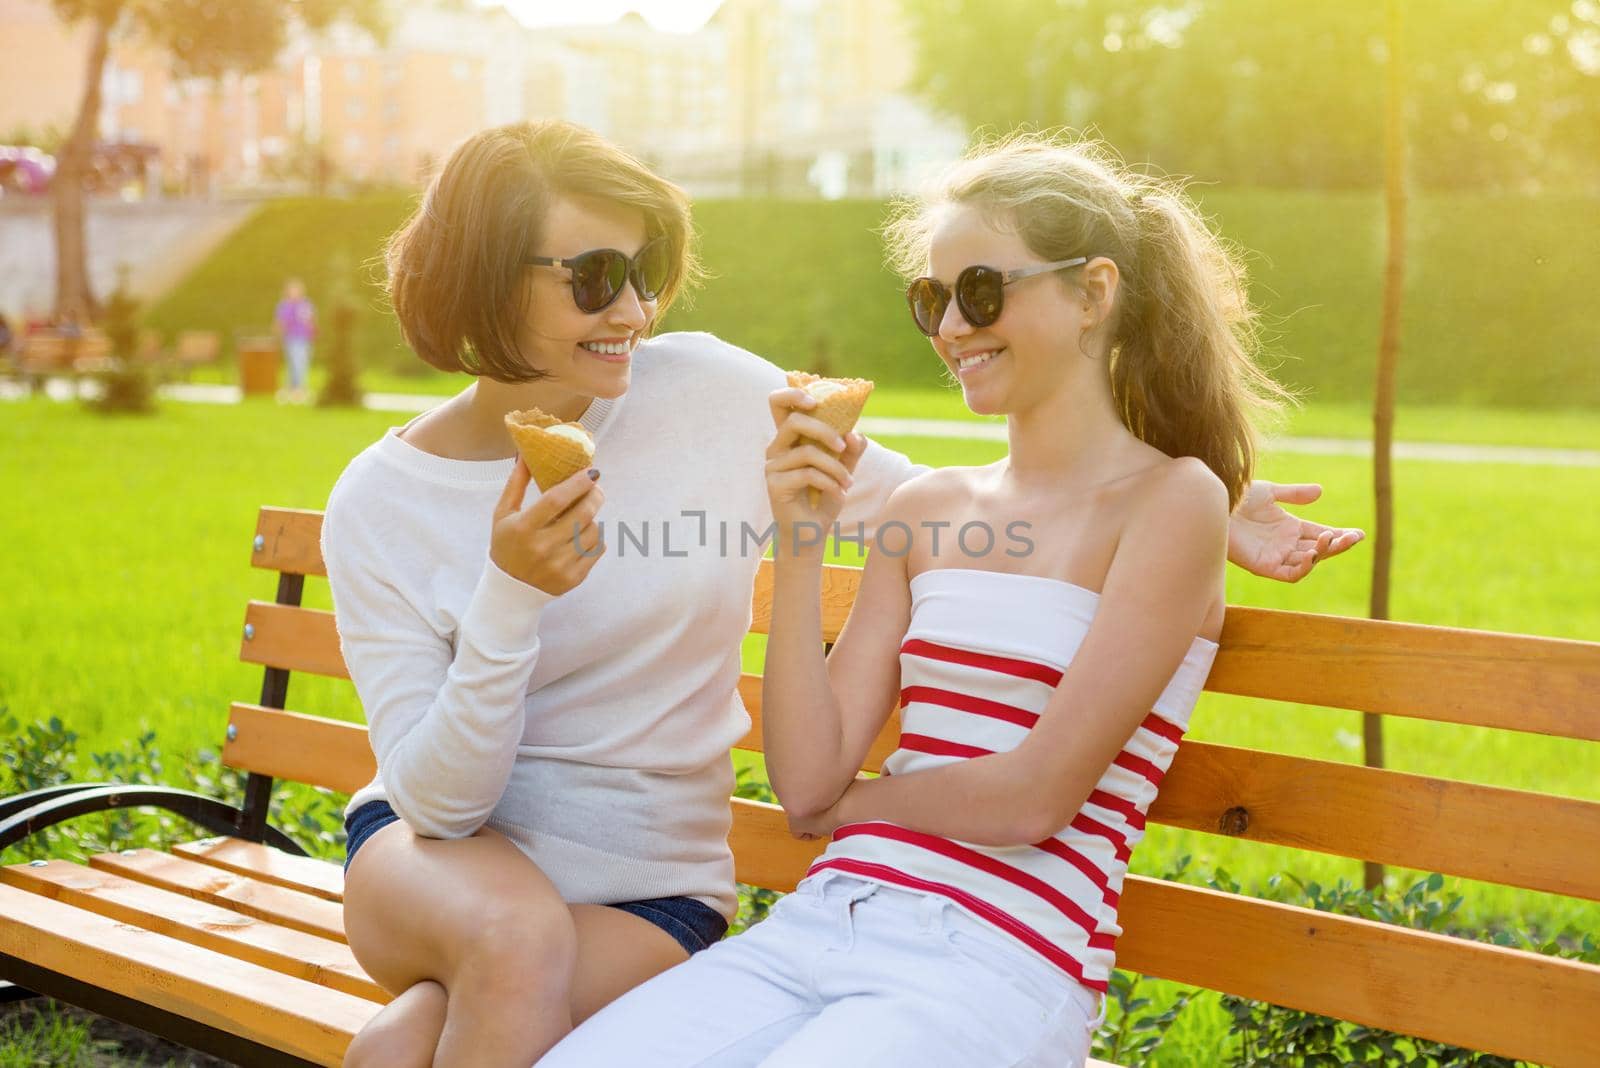 Mom and daughter laugh, eat ice cream and enjoy socializing.